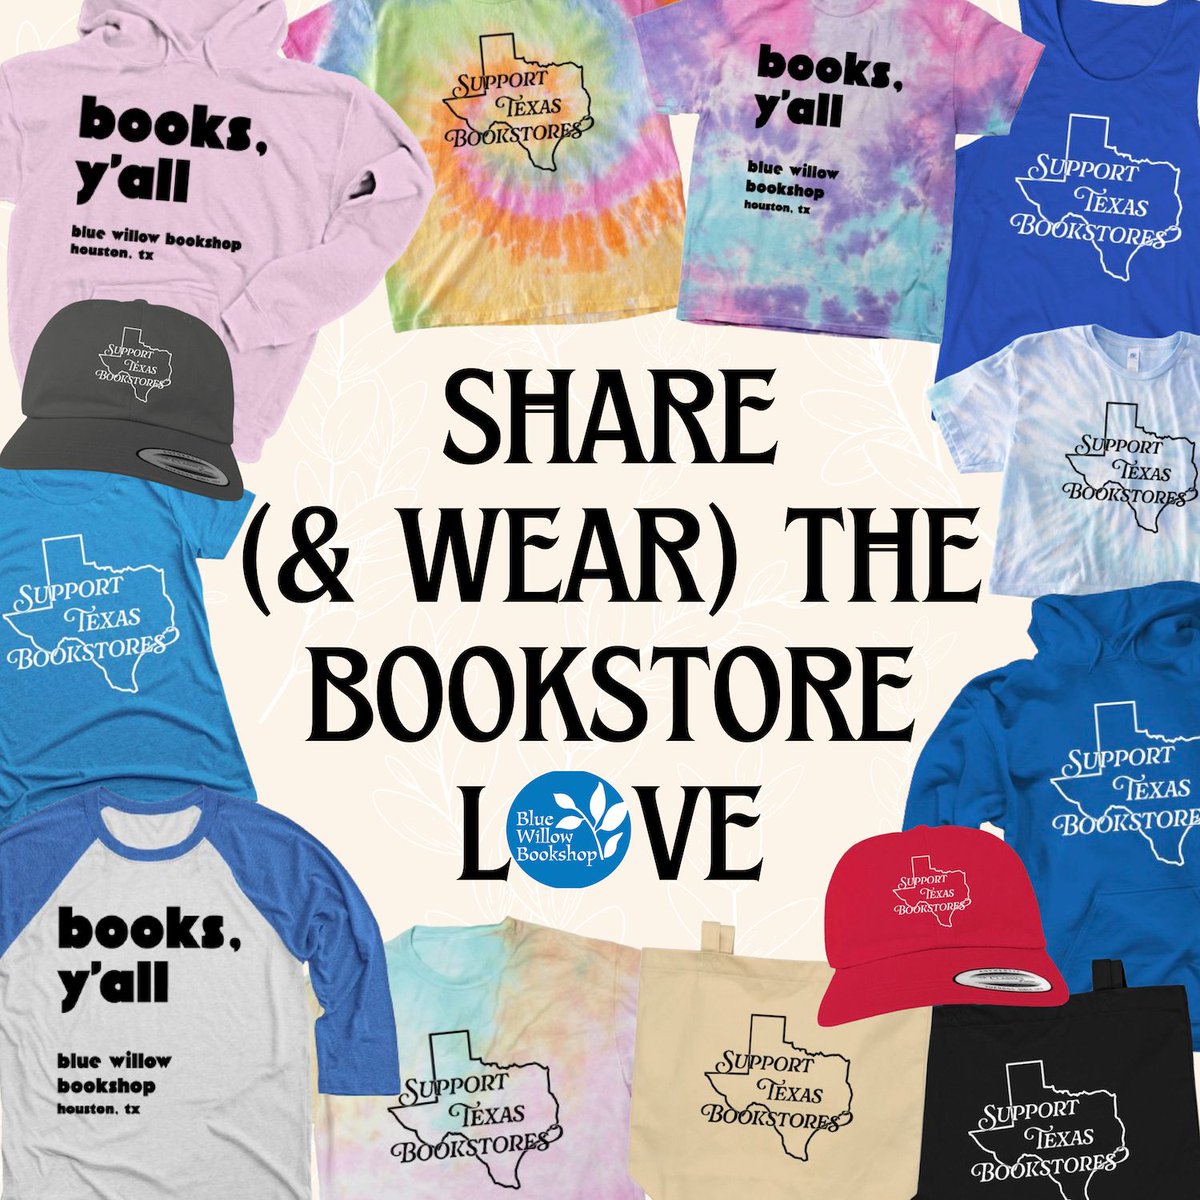 📣 Today is the last day to shop our limited edition merch! We have two designs, 'Support Texas Bookstores' and 'Books, Y'all,' in a variety of styles and colors. Visit our @bonfire storefront to see the hoodies, tees, tie-dye, hats, totes, and more! 😍 bonfire.com/store/bluewill…